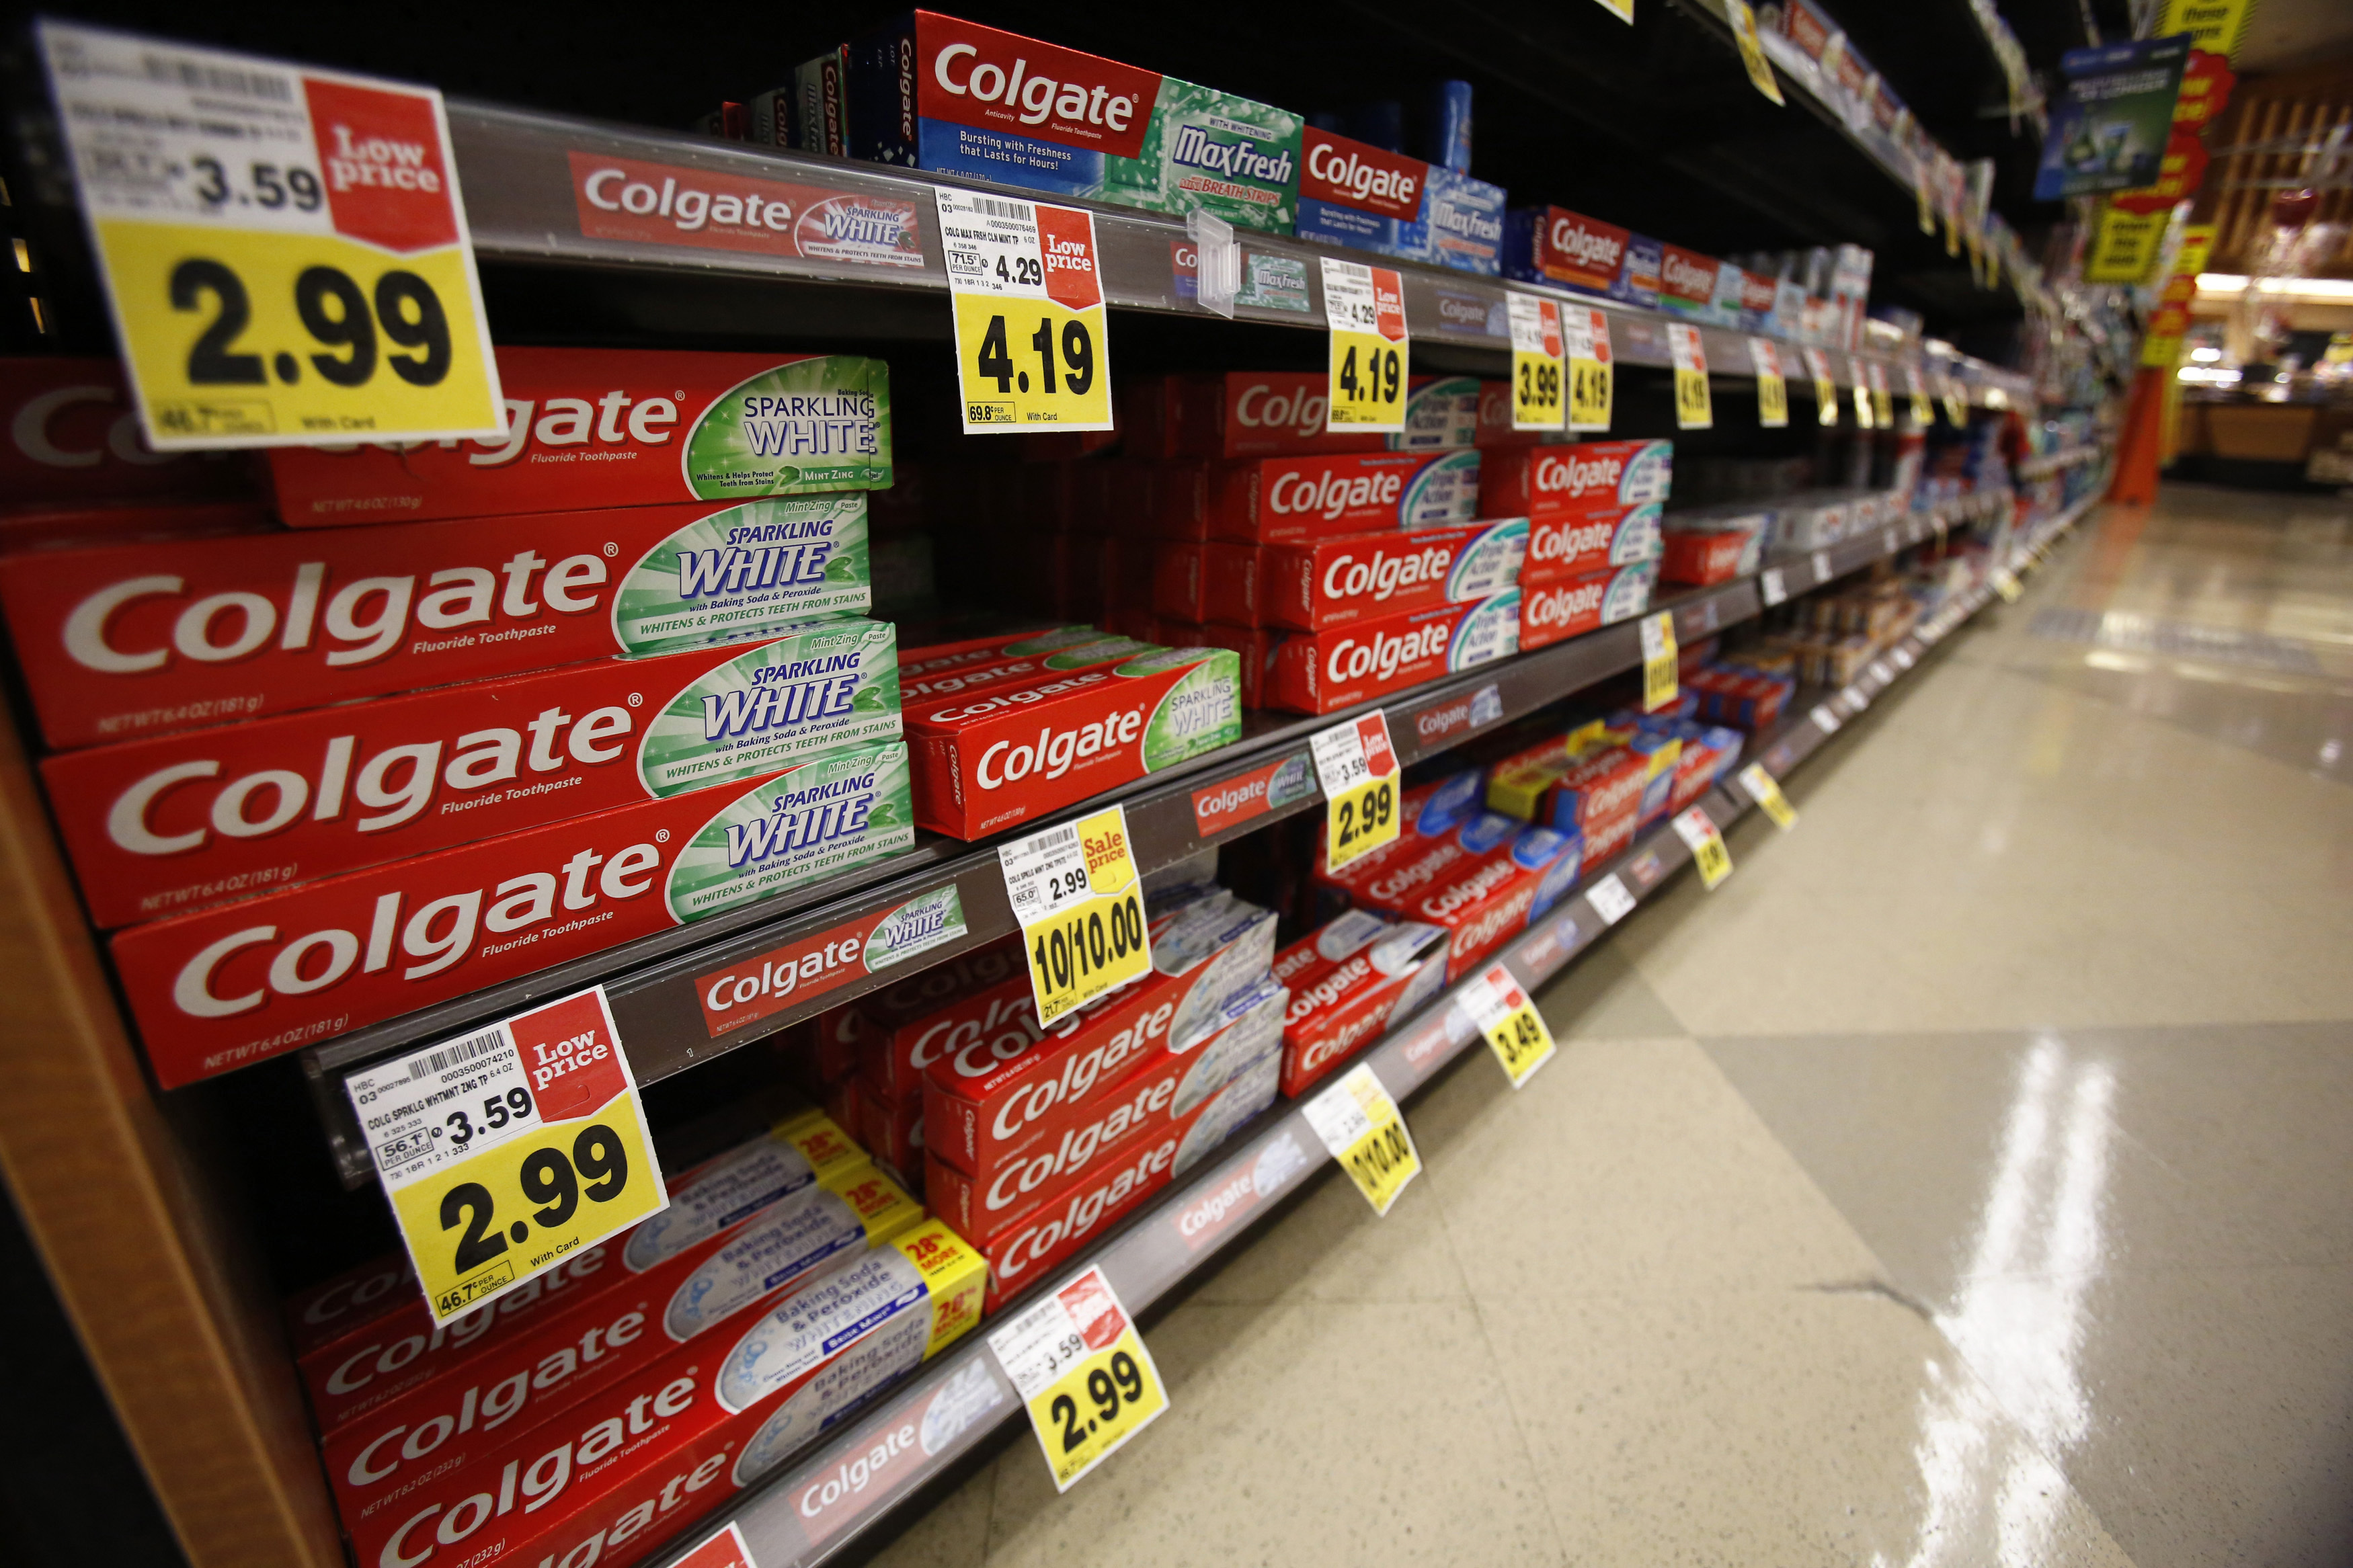 Colgate toothpaste is pictured on sale at a grocery store in Pasadena